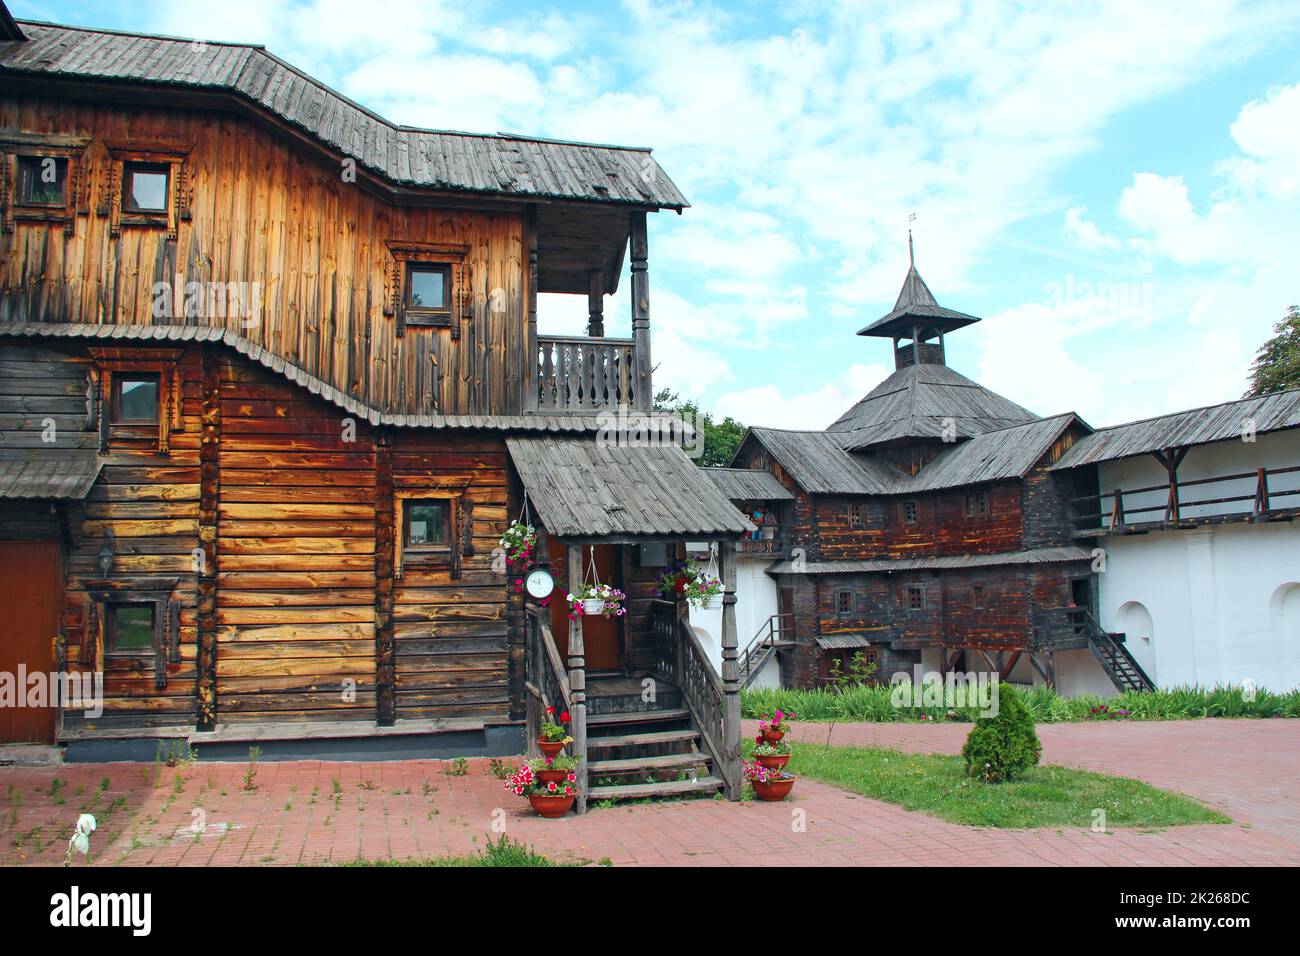 Ancient Slavonic wooden fortress in Novhorod-Siverskii. Old wooden building Stock Photo